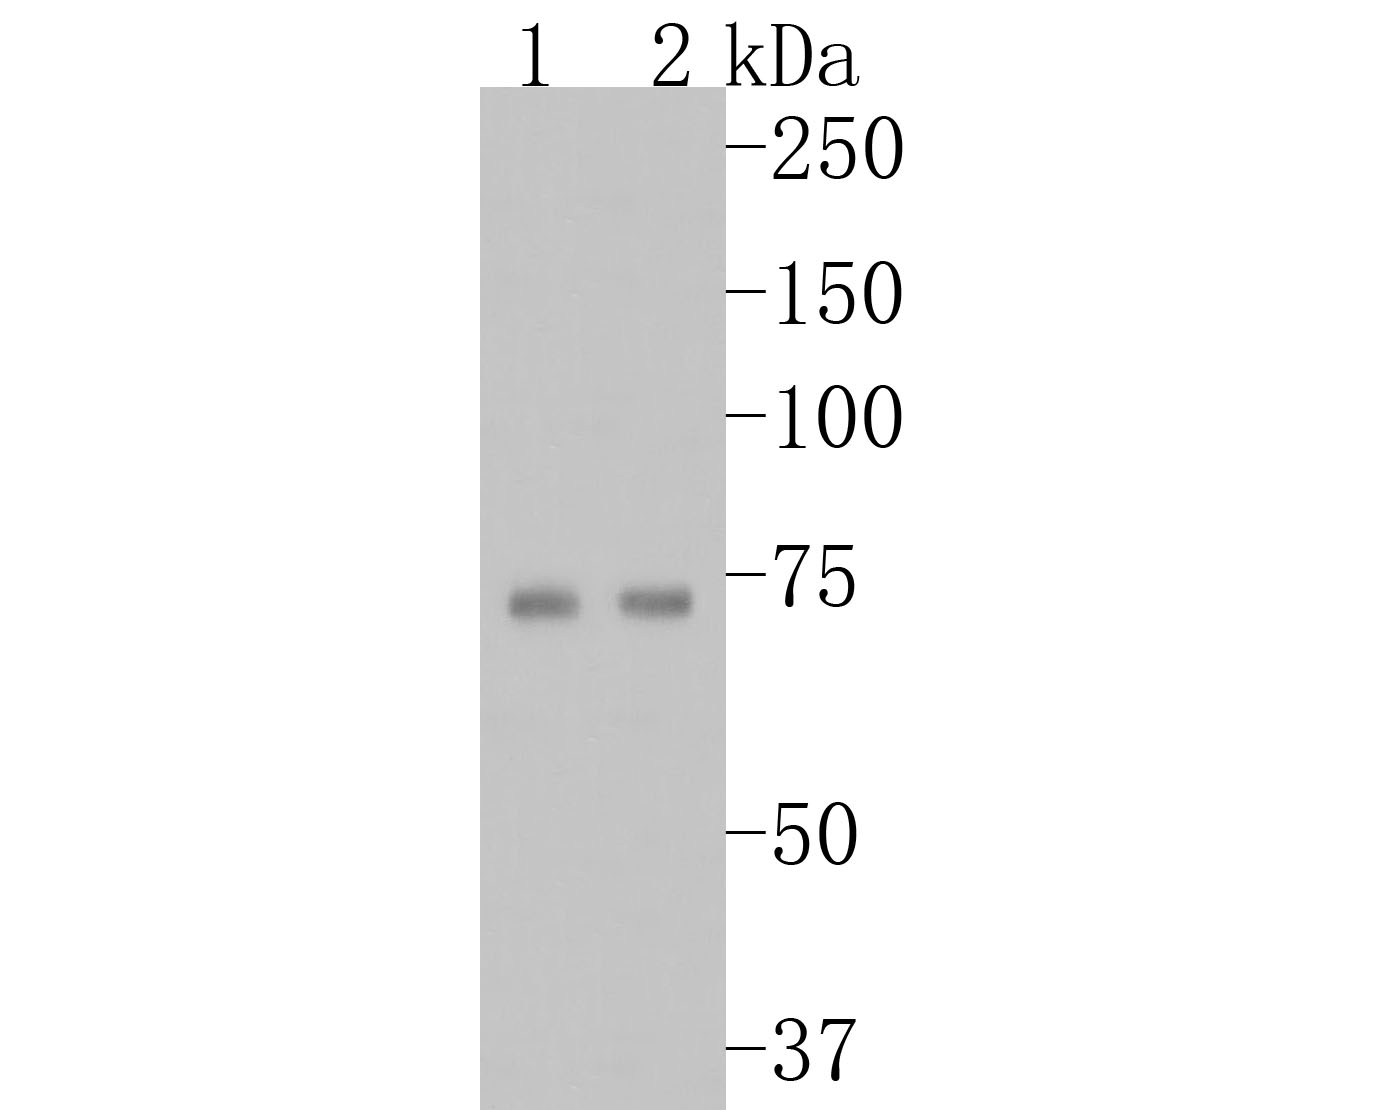 Western blot analysis of Tryptophan Hydroxylase 1 (TPH1) on different lysates. Proteins were transferred to a PVDF membrane and blocked with 5% BSA in PBS for 1 hour at room temperature. The primary antibody (ET1610-37, 1/500) was used in 5% BSA at room temperature for 2 hours. Goat Anti-Rabbit IgG - HRP Secondary Antibody (HA1001) at 1:5,000 dilution was used for 1 hour at room temperature.<br />
Positive control: <br />
Lane 1: HL-60 cell lysate<br />
Lane 2: Hela cell lysate